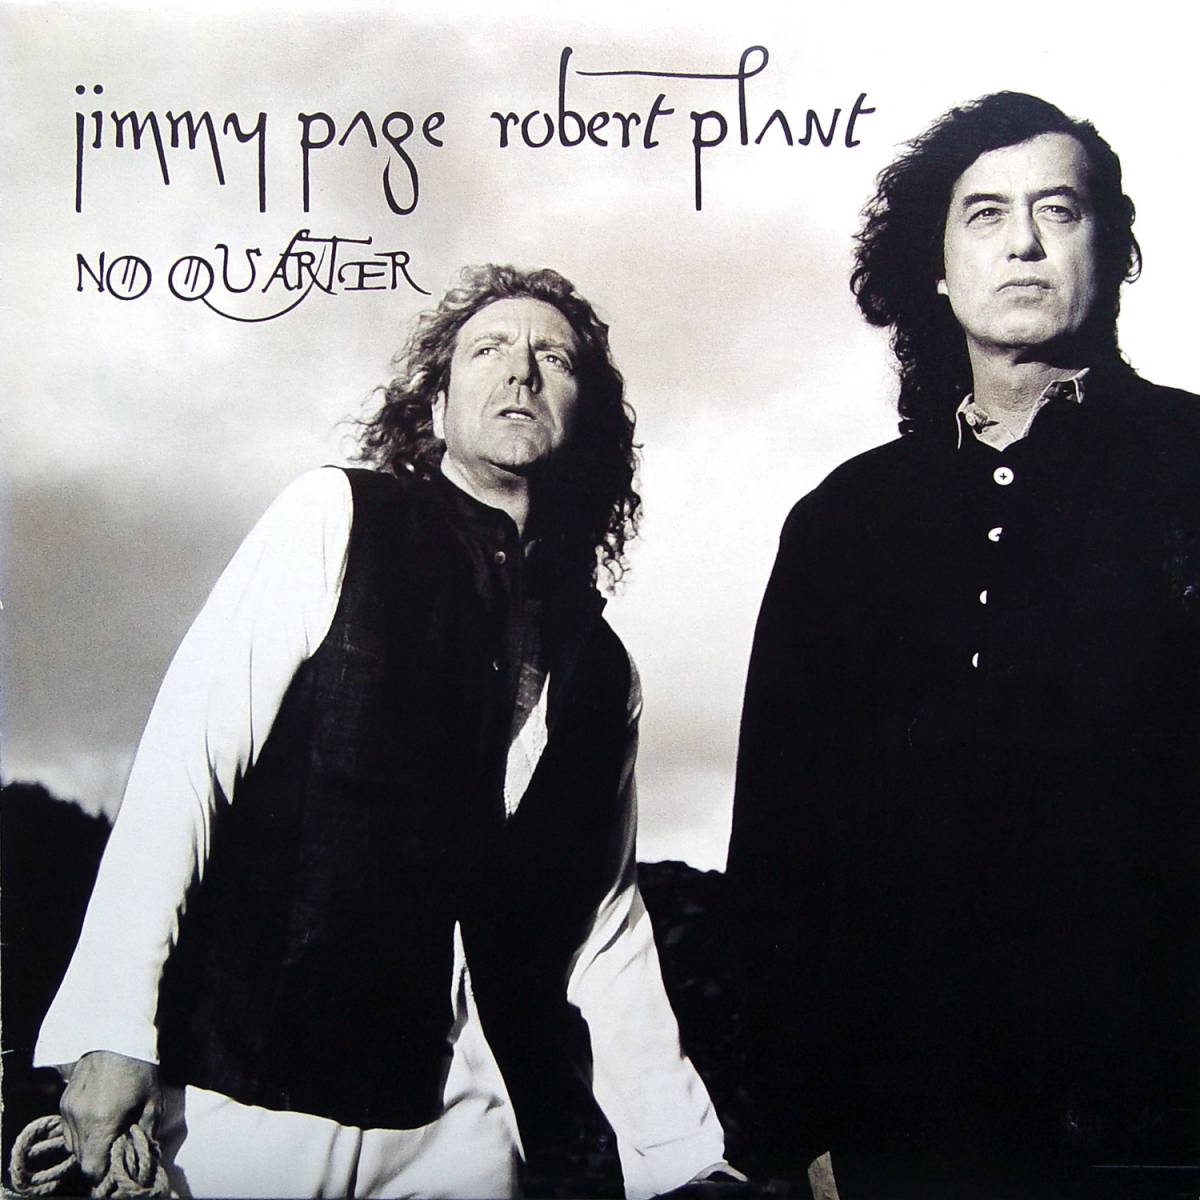 In black and white, we see Robert Plant on the left wearing a black coat with white sleeves, and Jimmy Page stands next to him, all in black.